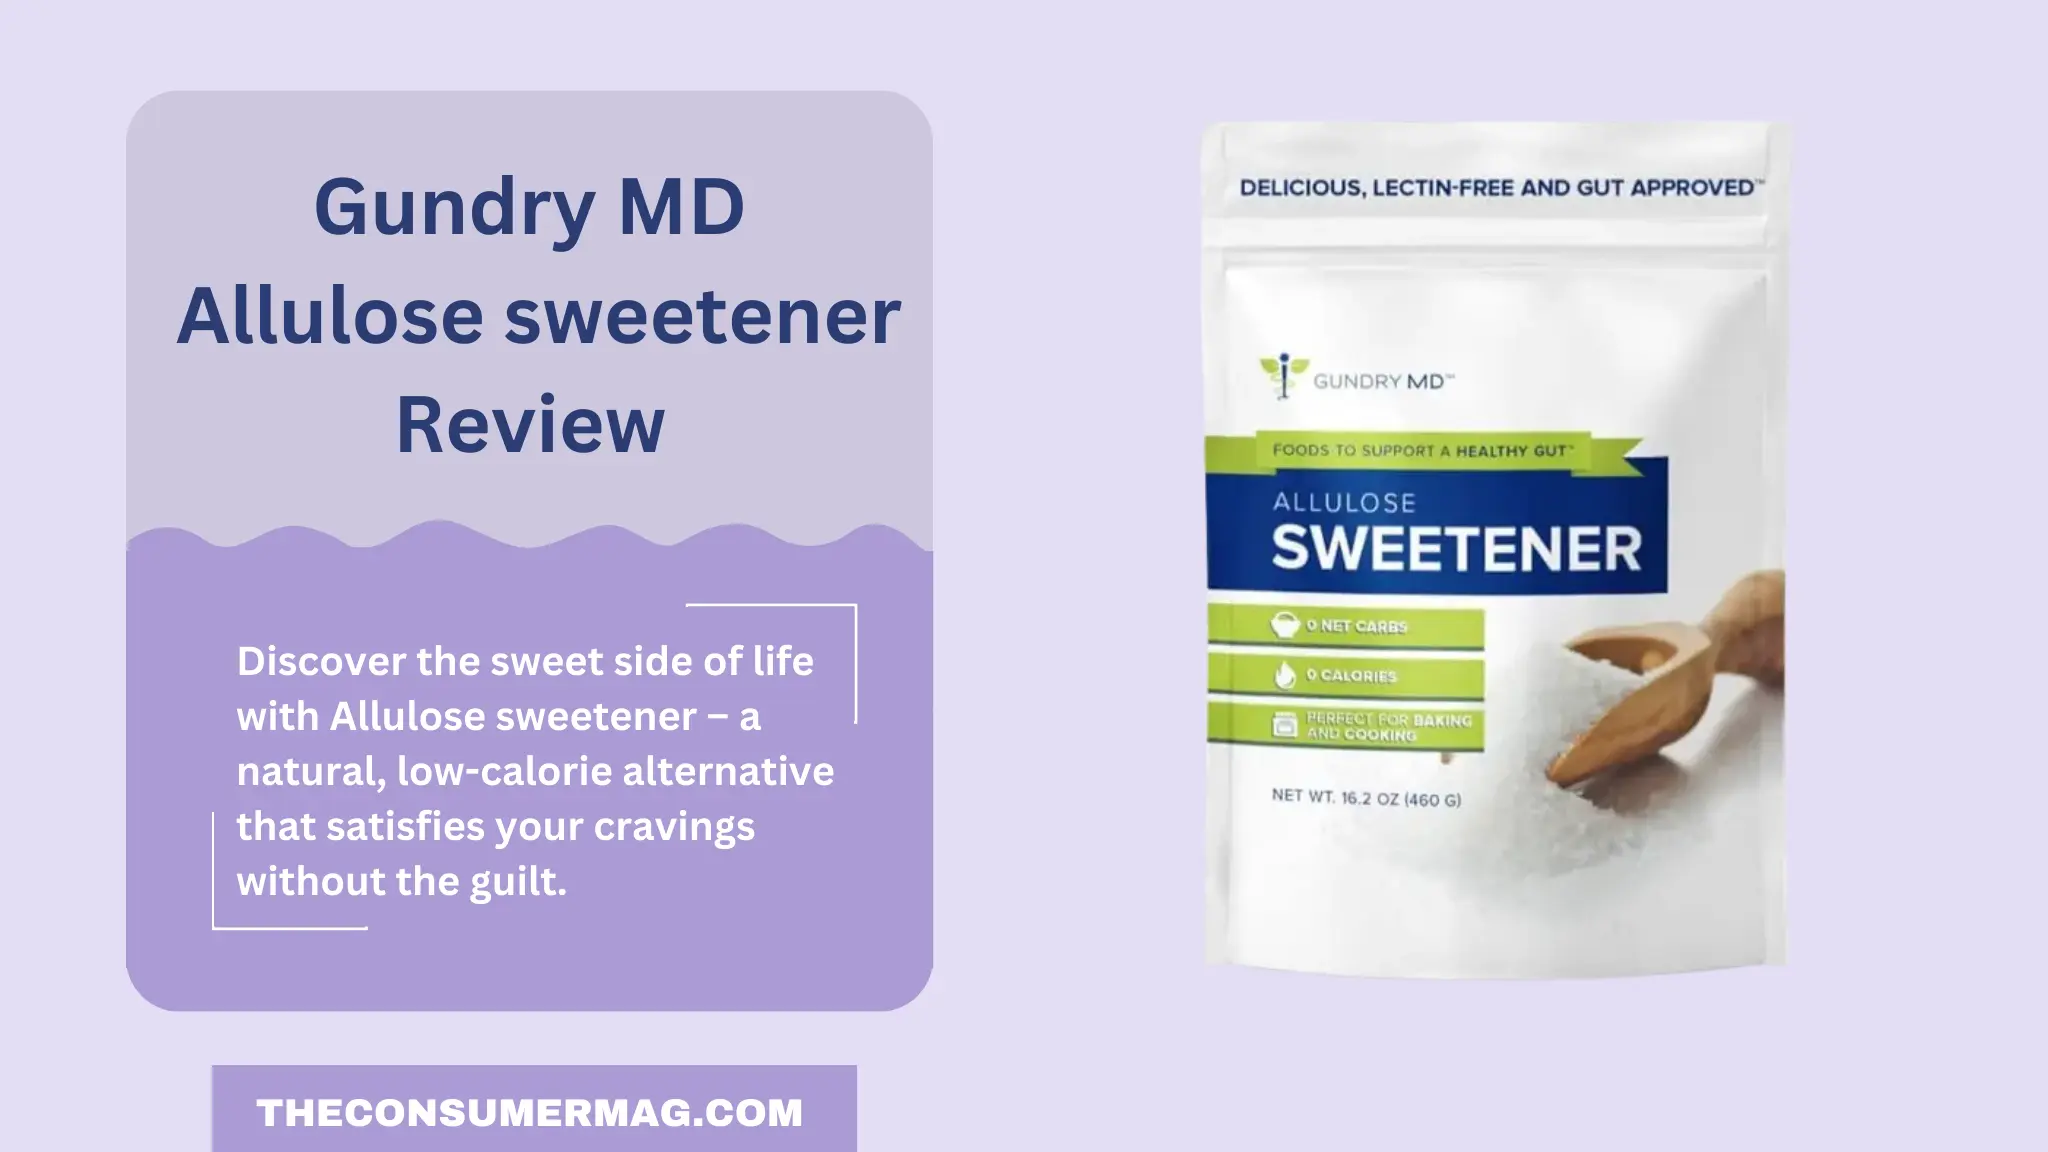 Allulose Sweetener Review: Read All Allulose Sweetener Reviews